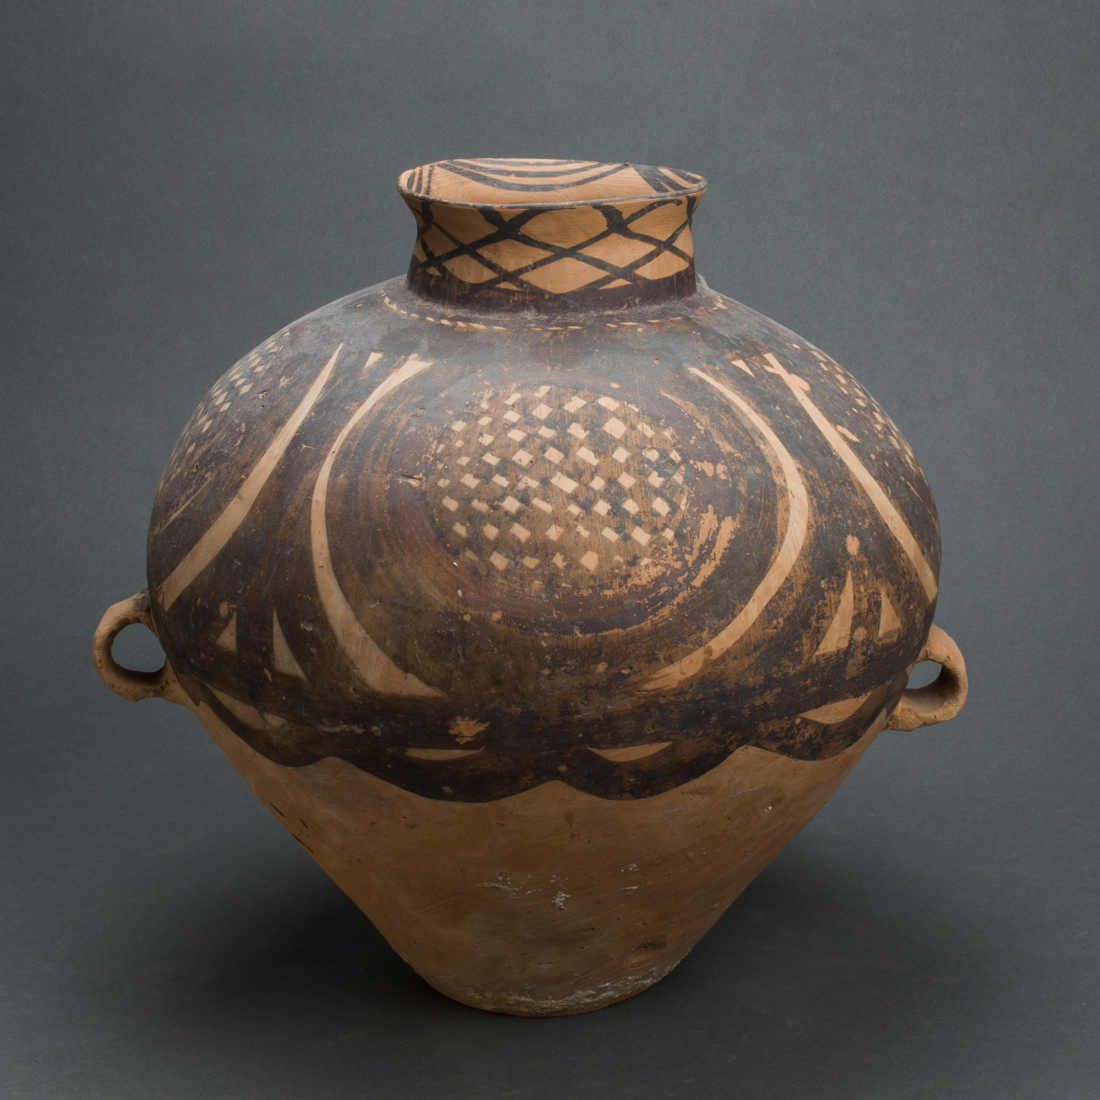 CHINESE NEOLITHIC PAINTED POTTERY 3a10ad